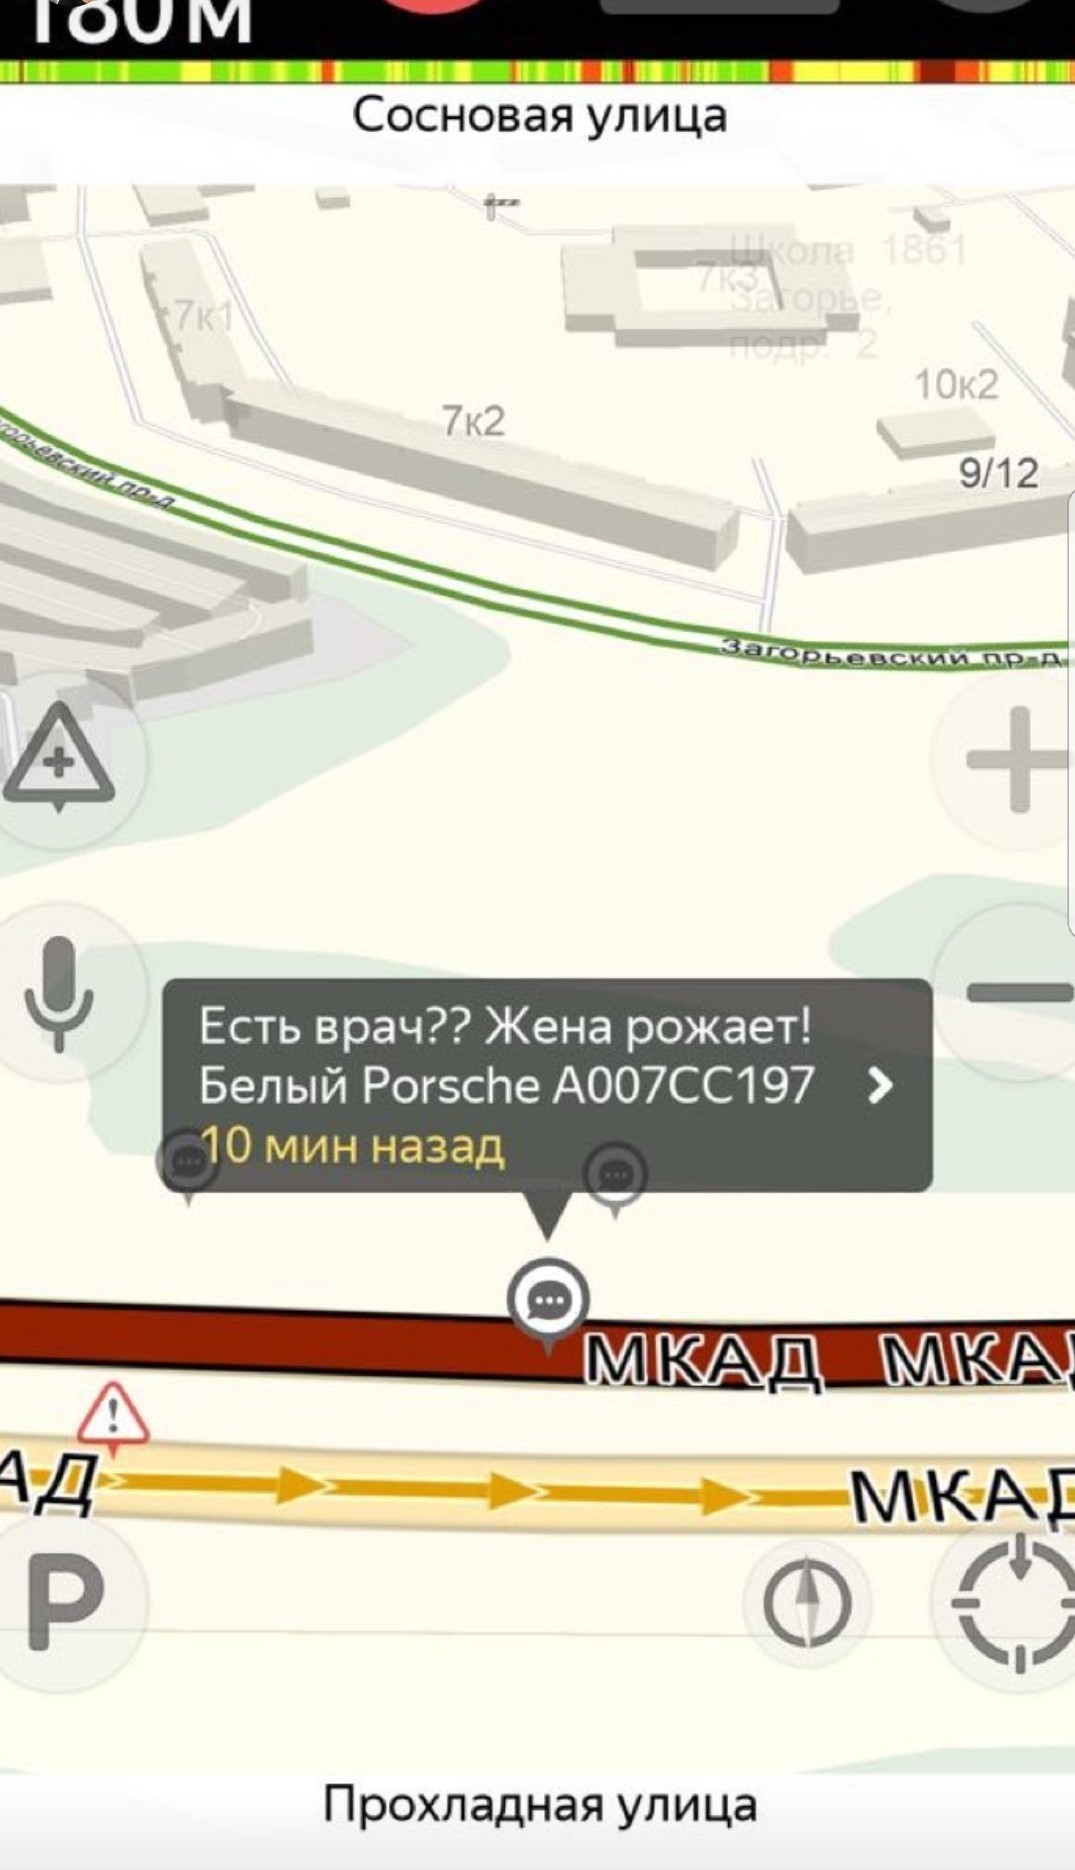 Is there a doctor? - Moscow, Traffic jams